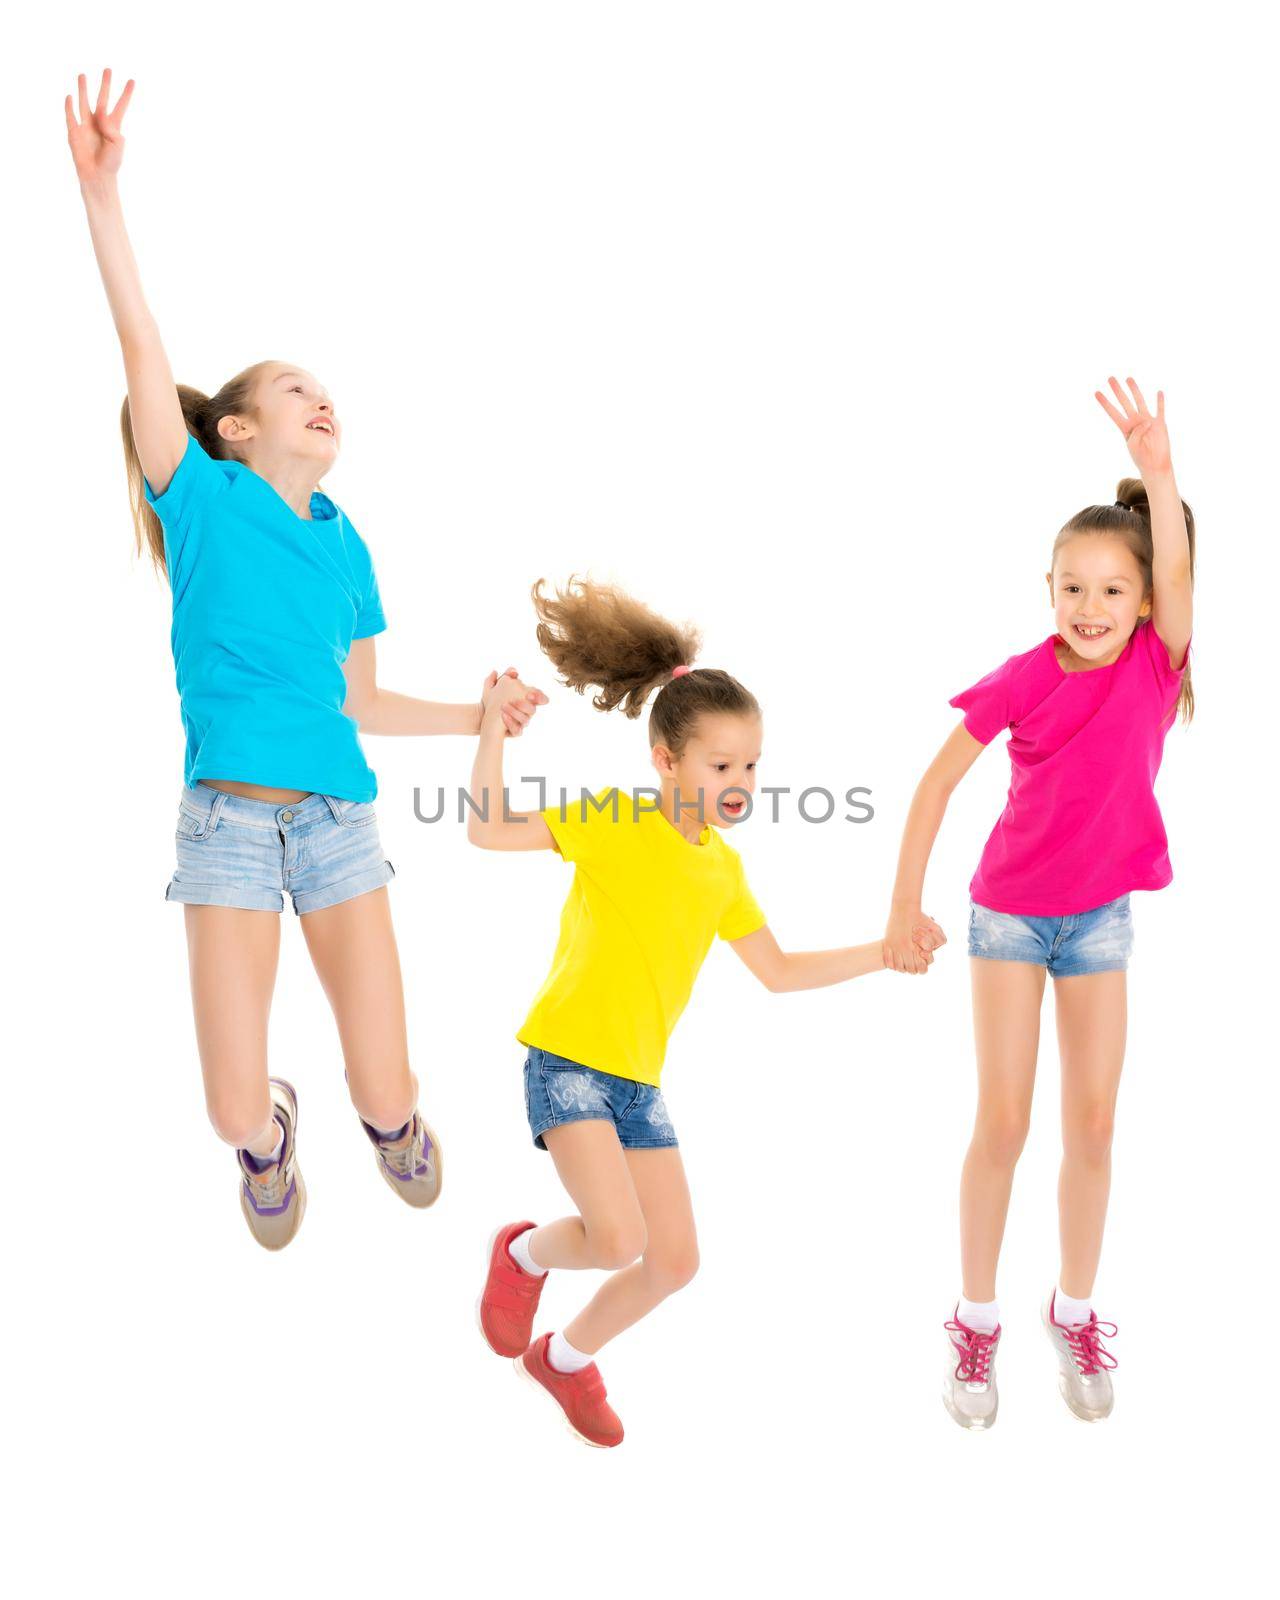 A large group of happy joyful children jumps and dances. The concept of sport, summer holidays. Isolated on white background.